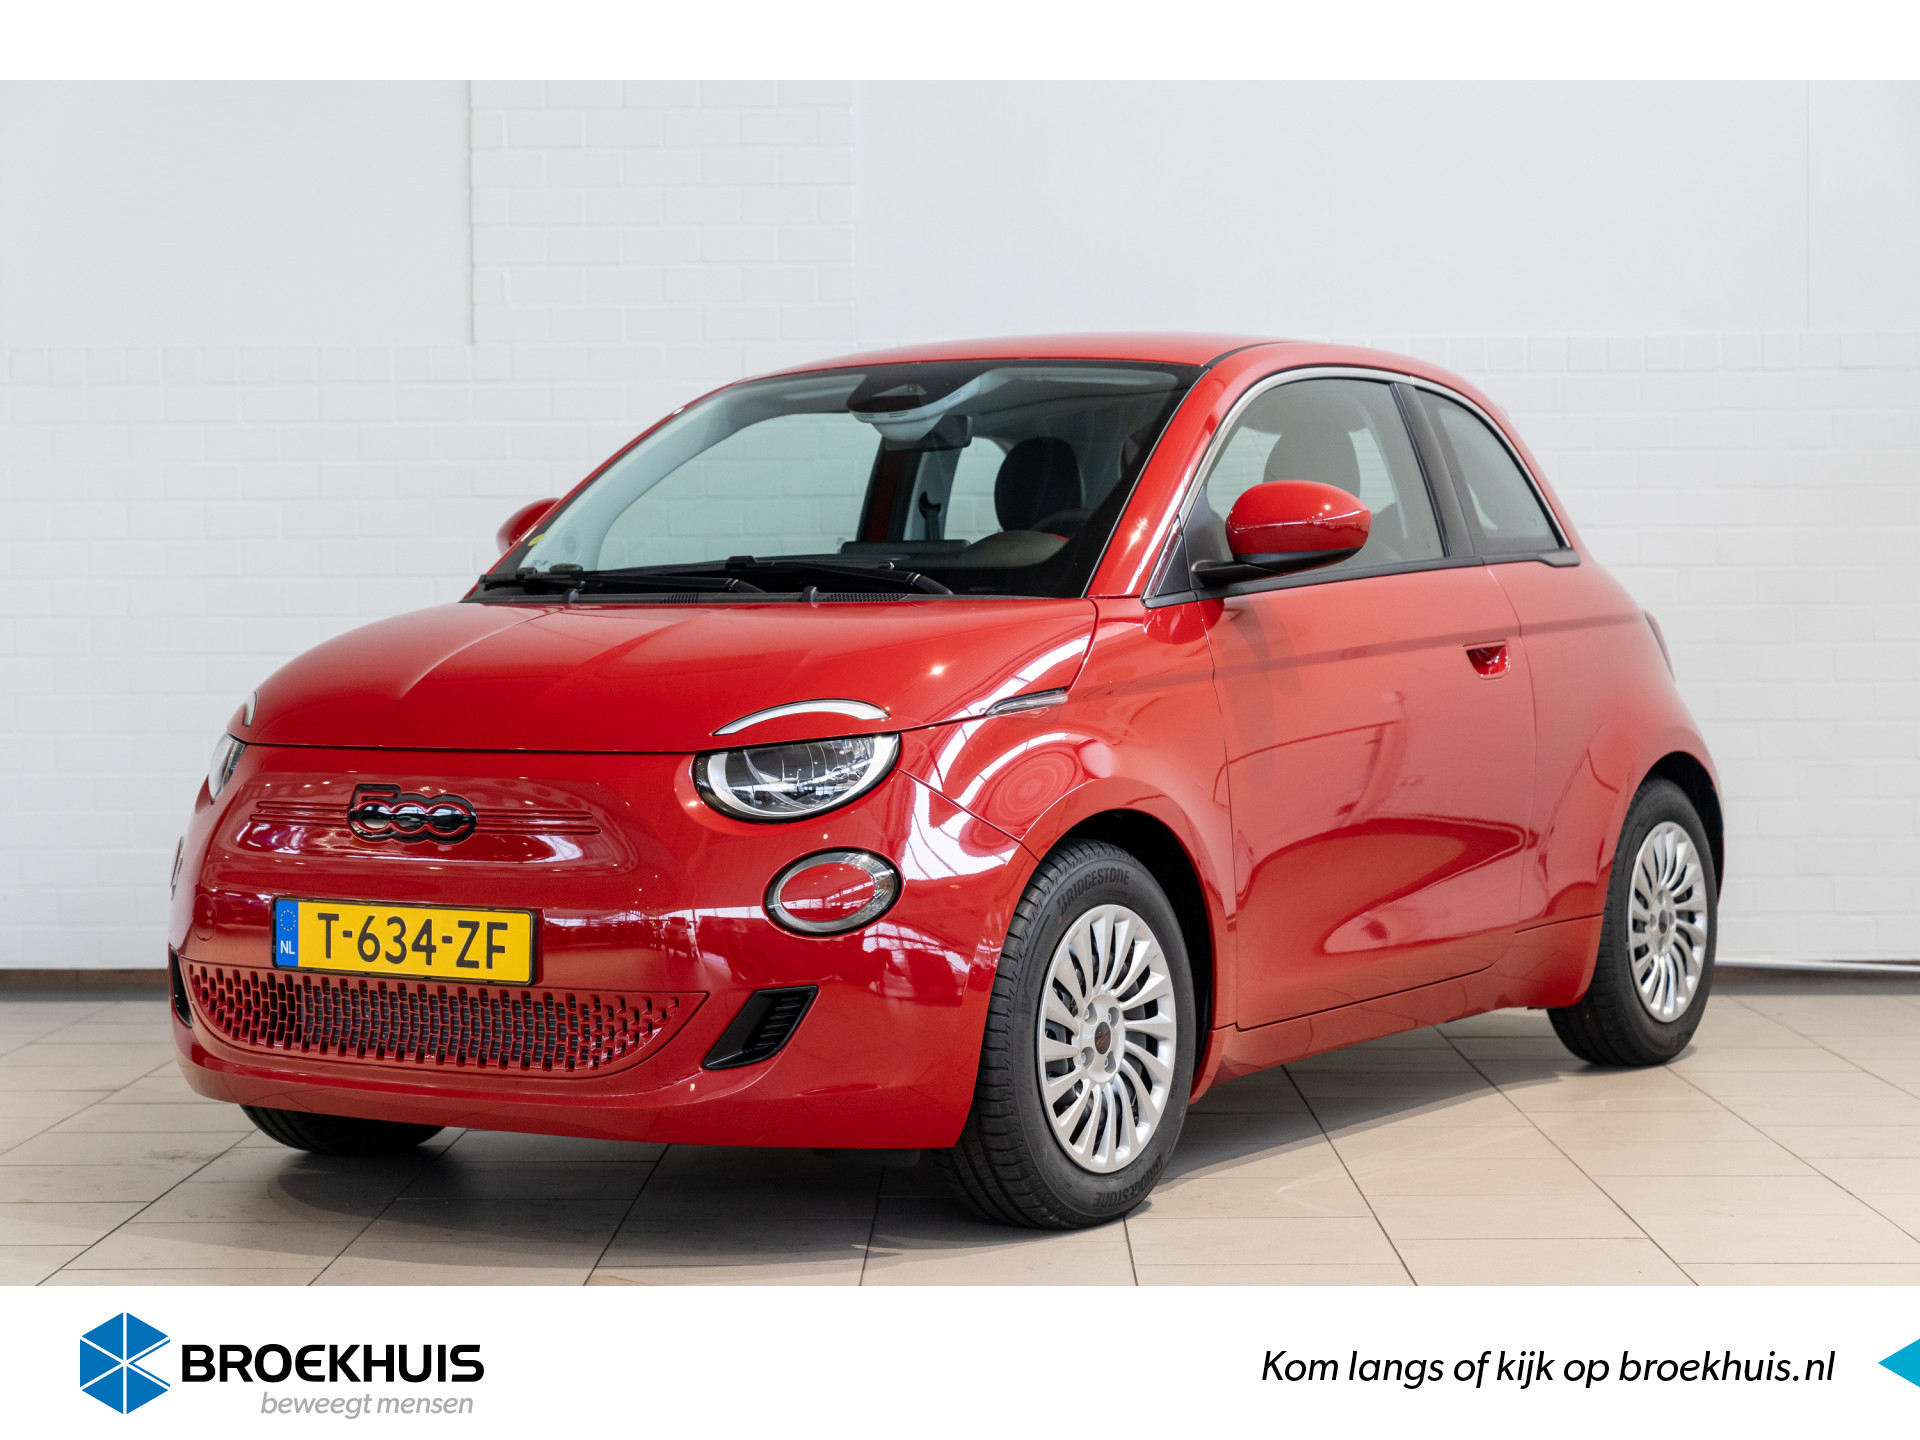 Fiat 500 RED 24 kWh | Navigatie | Pro Pack | Climate Controle | DAB | Apple Carplay & Android Auto | bij viaBOVAG.nl